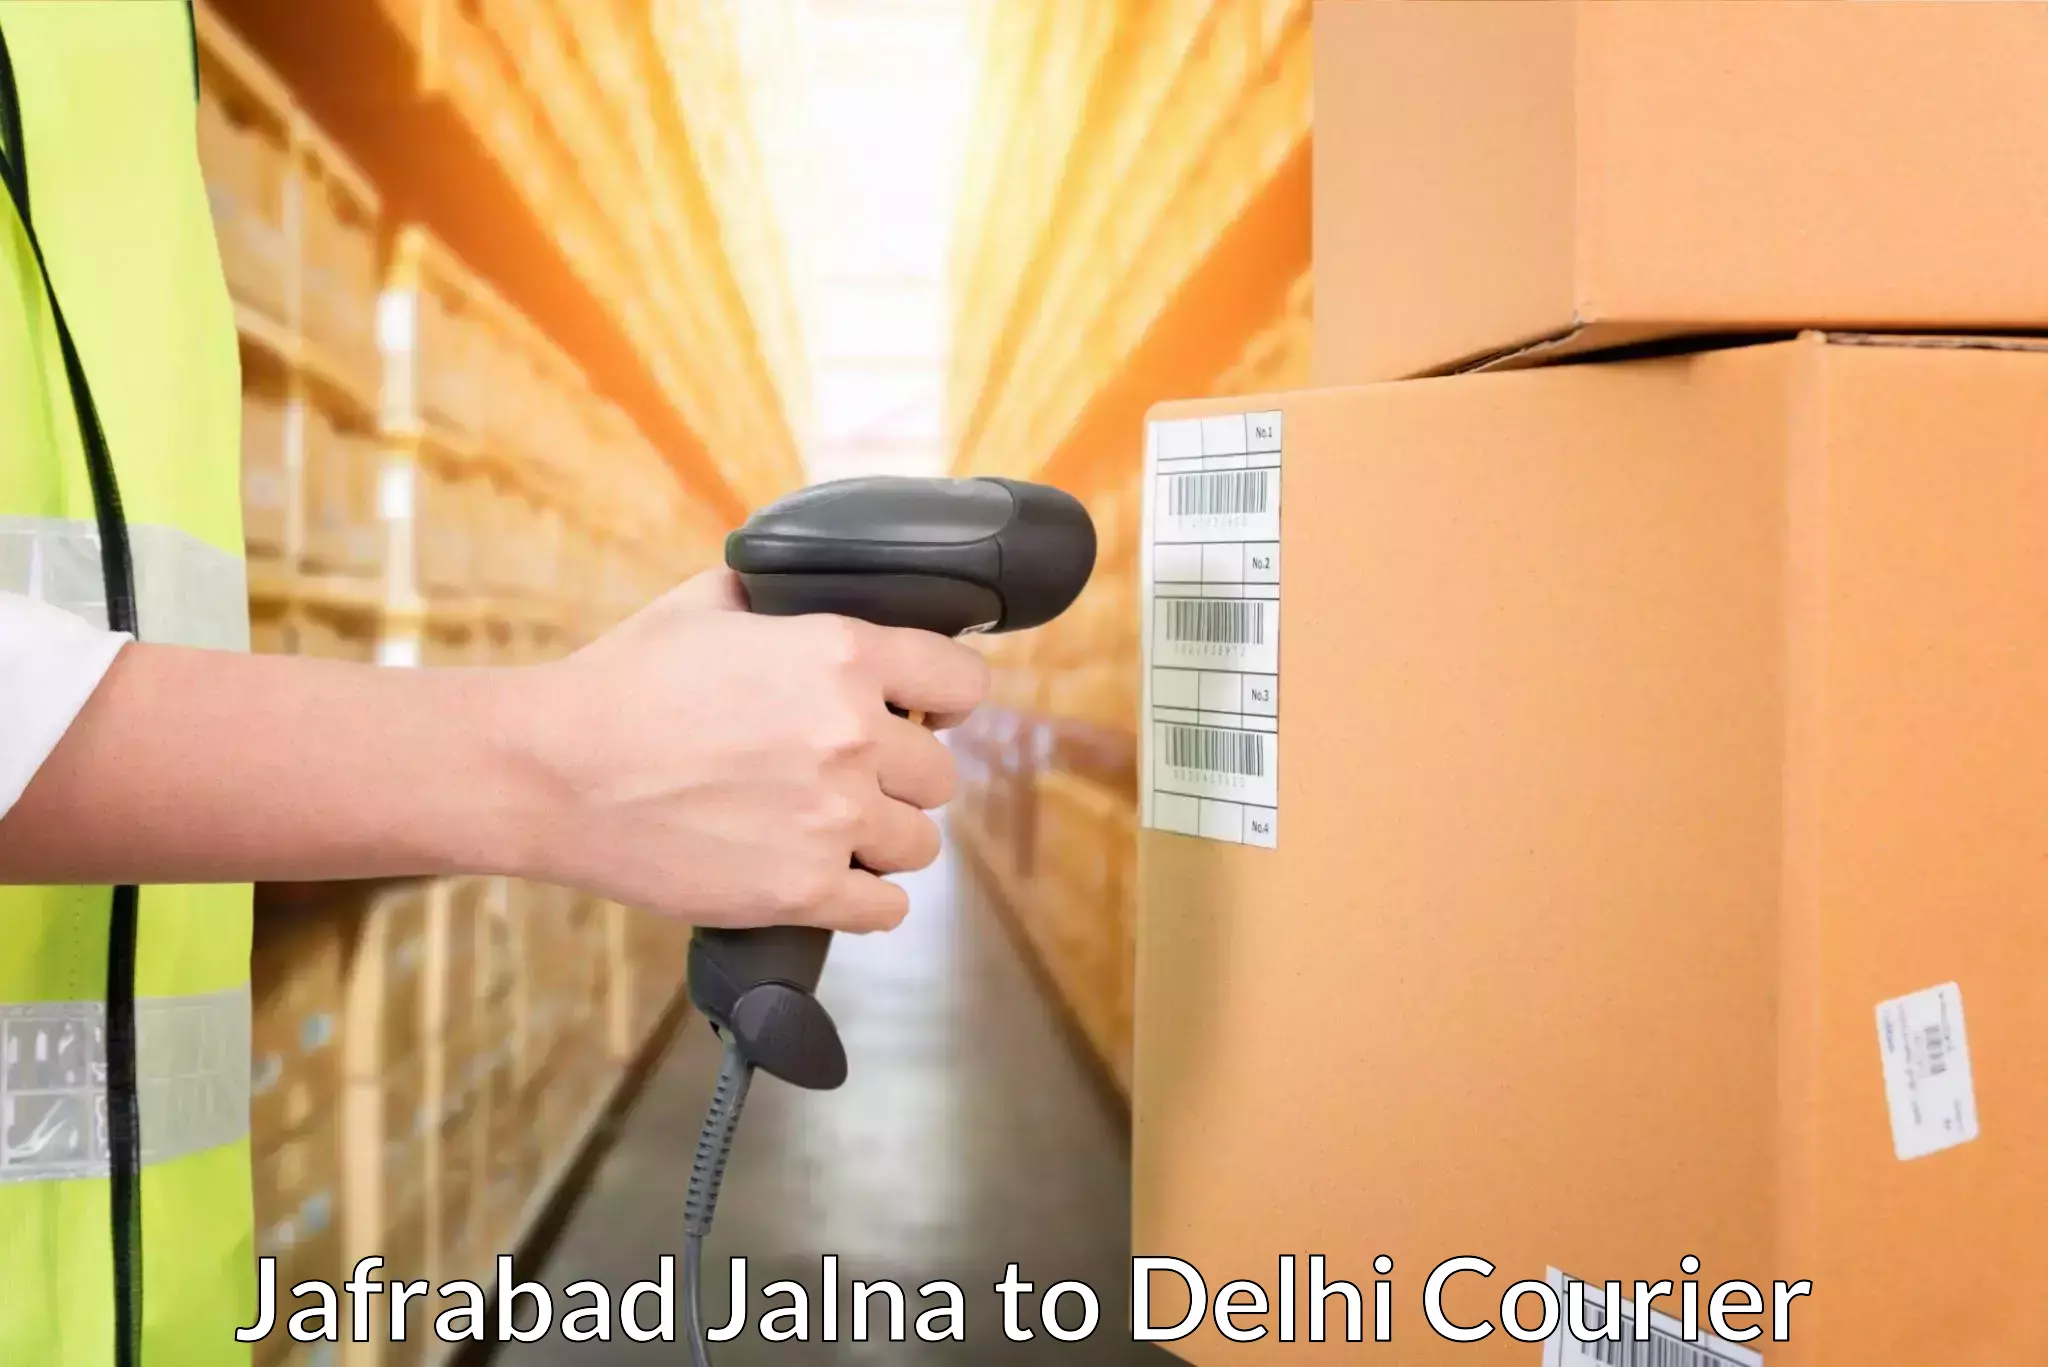 Customizable delivery plans Jafrabad Jalna to NCR